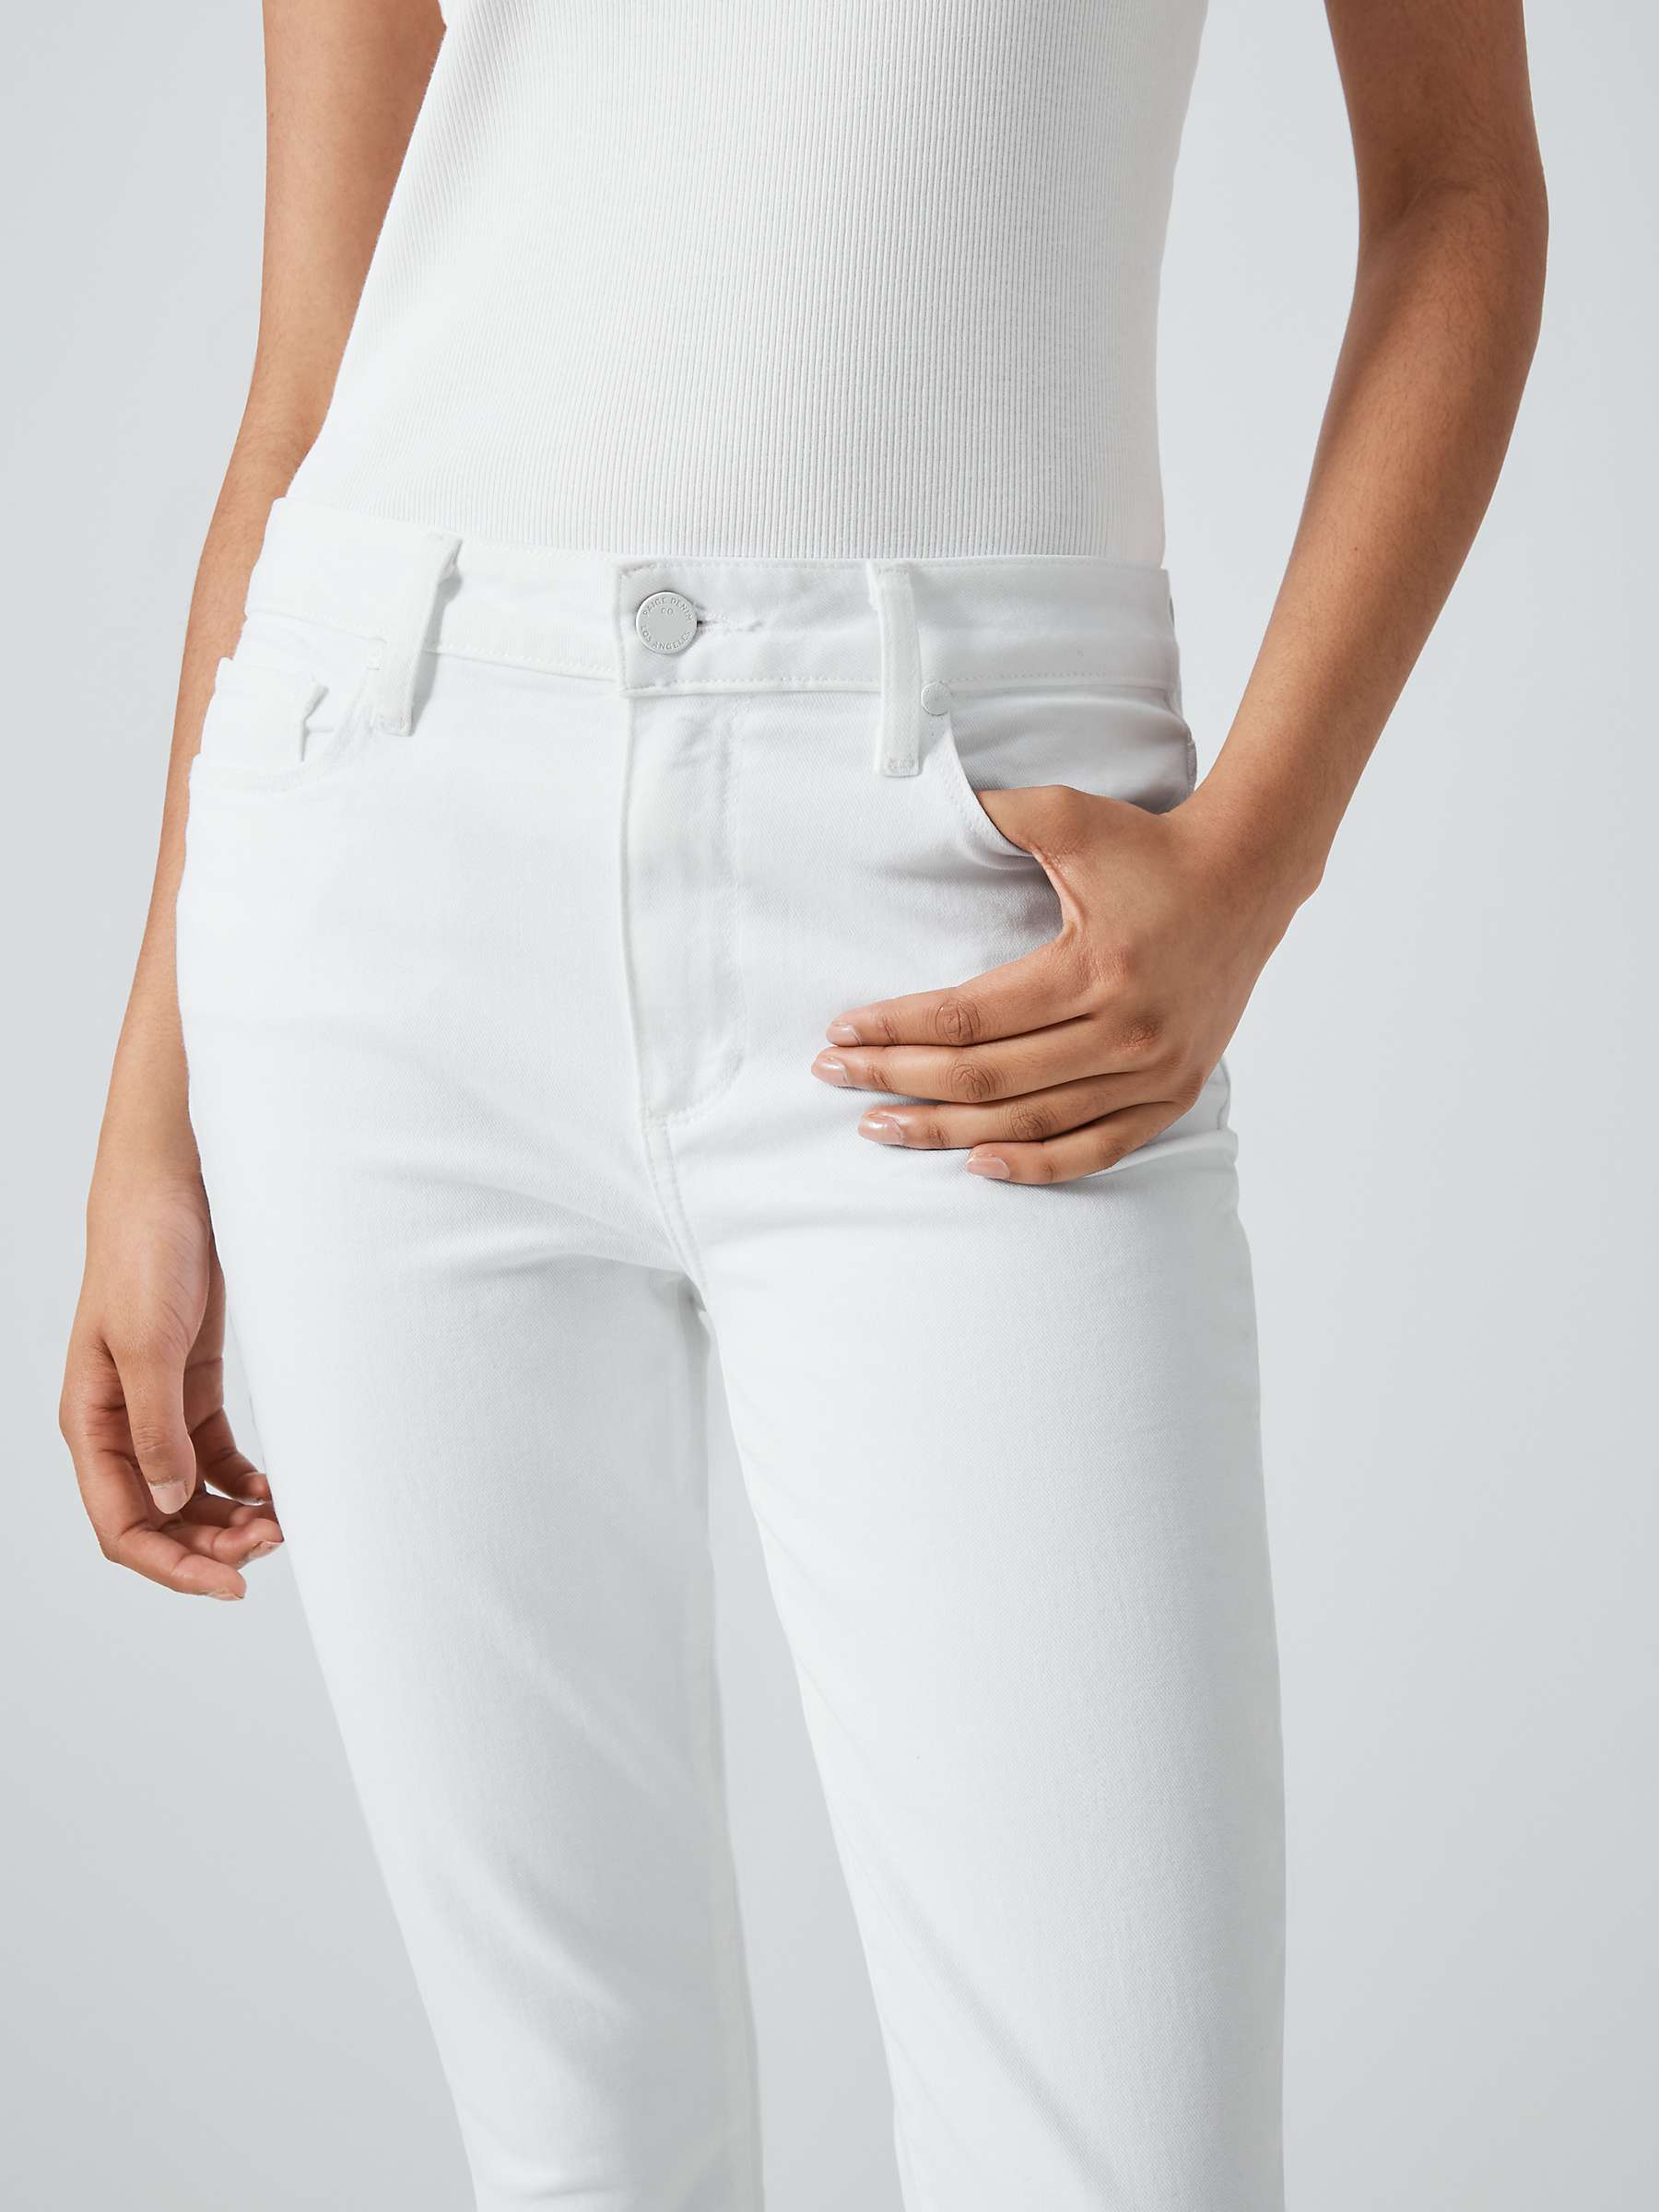 Buy PAIGE Hoxton High Rise Ultra Skinny Jeans, Crisp White Online at johnlewis.com